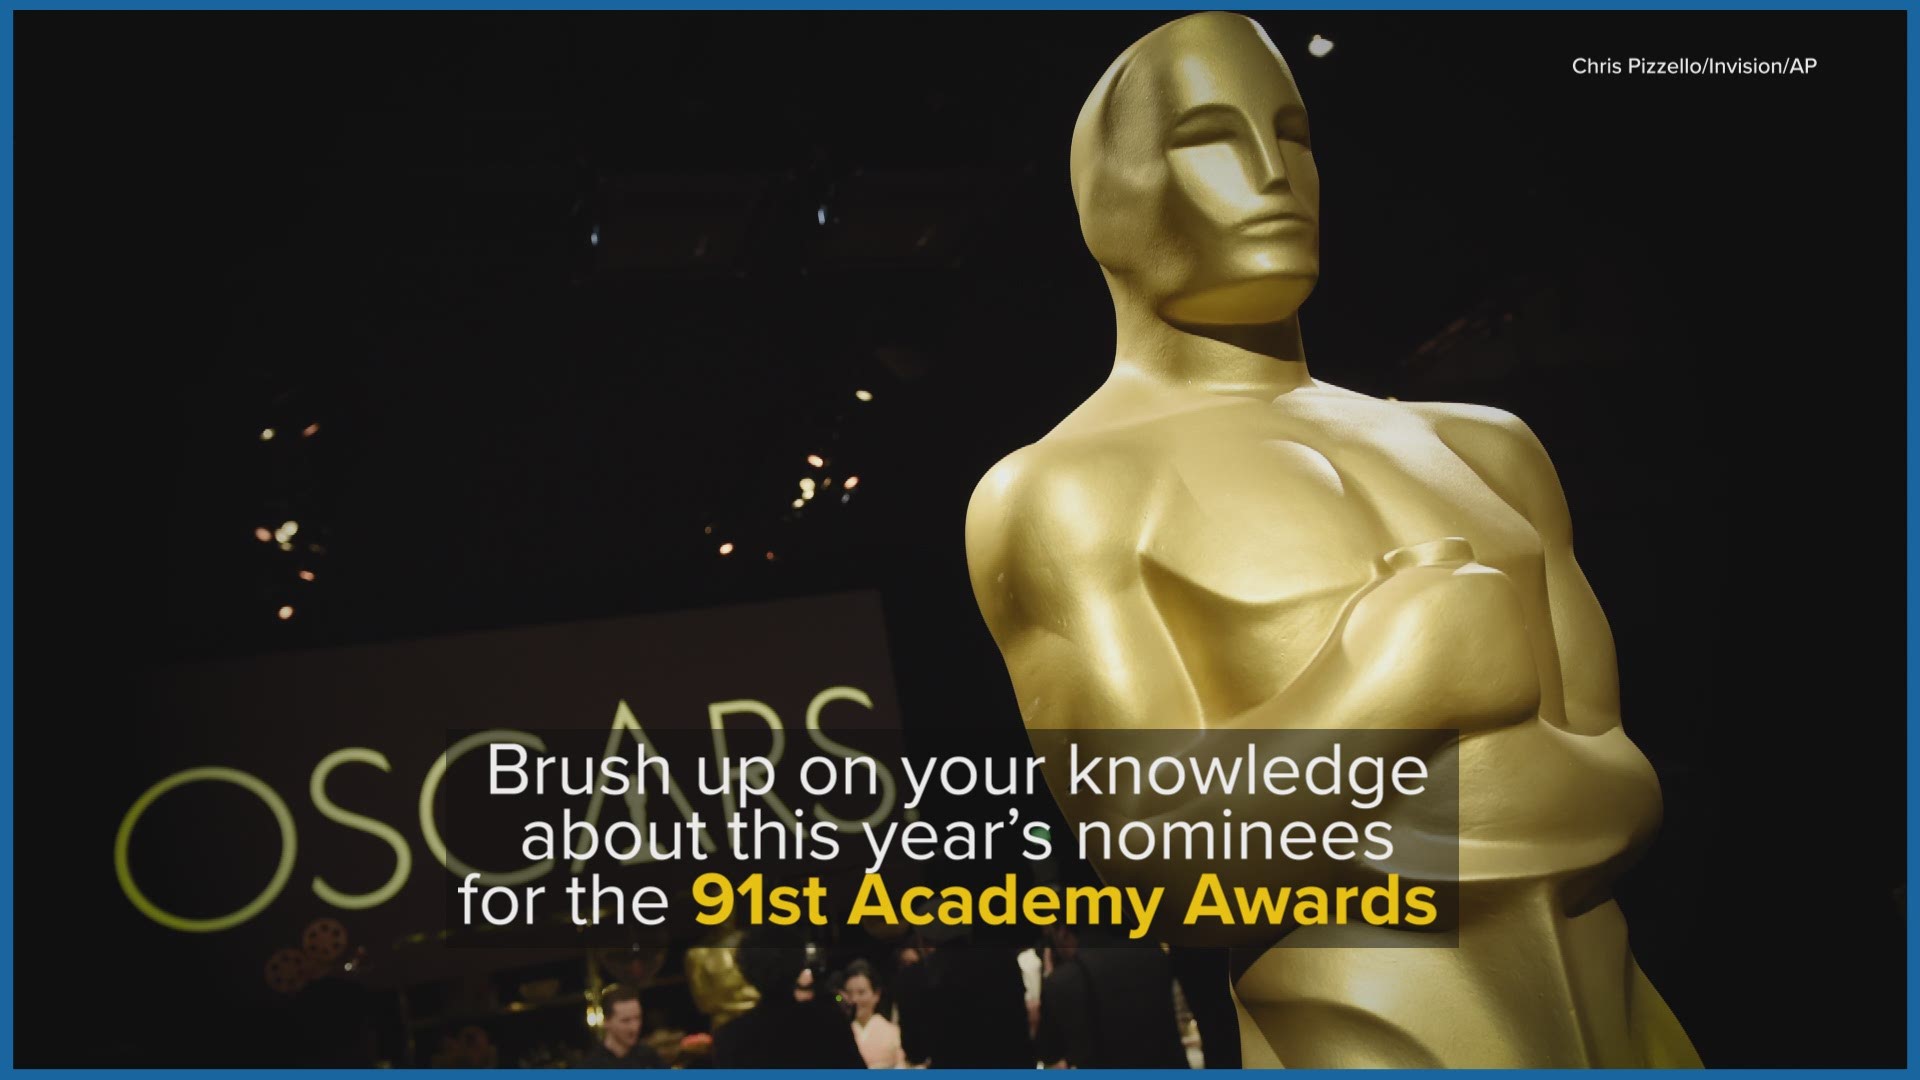 Brush up your Oscars knowledge with these fun facts ahead of the 91st Academy Awards.